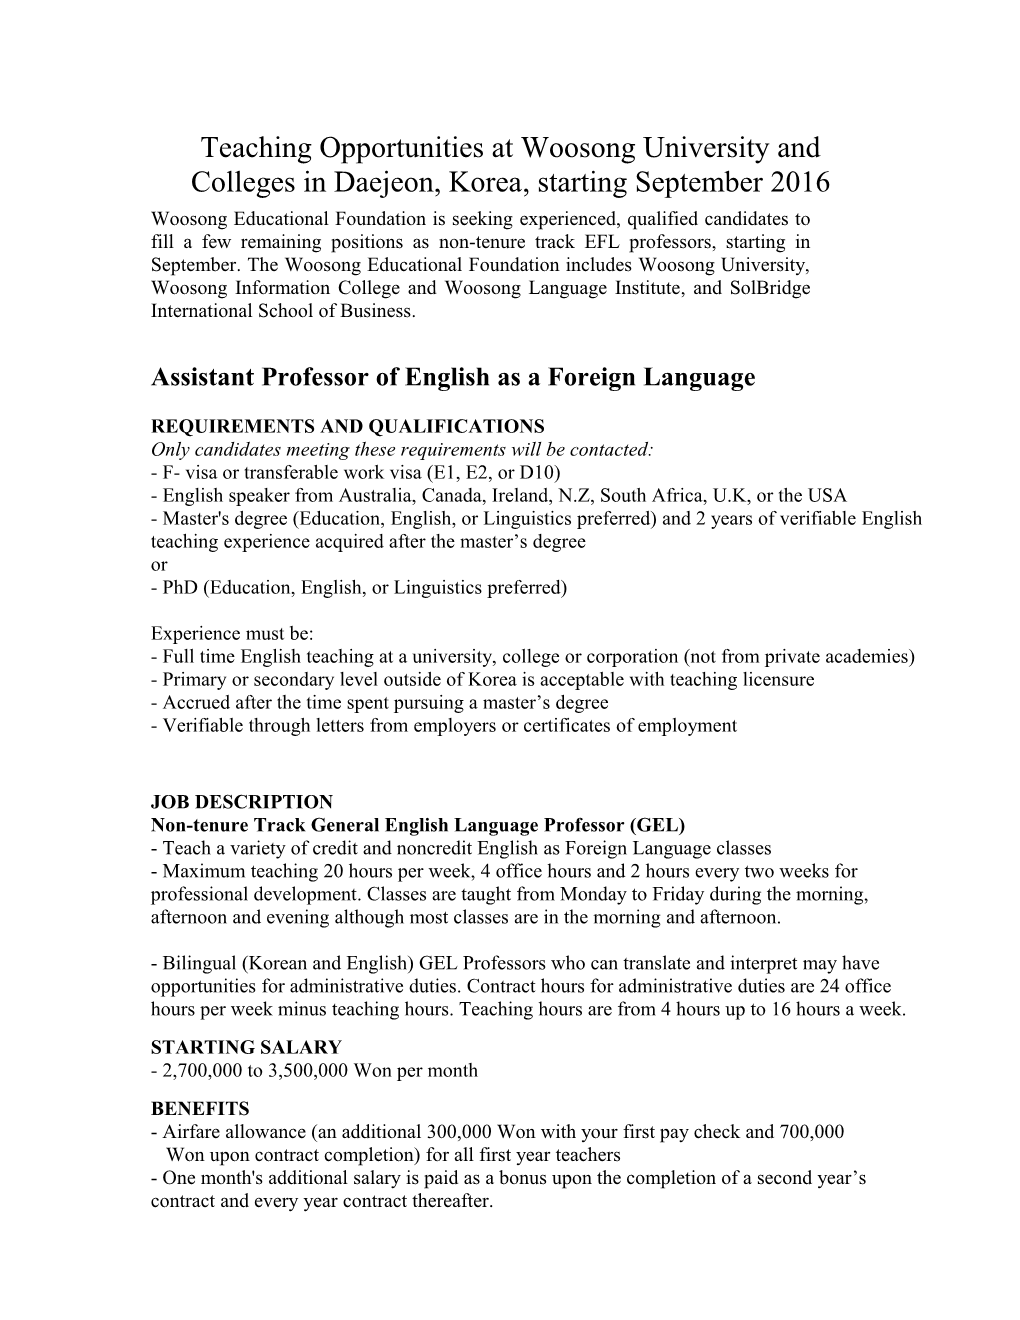 Teaching Opportunities at Woosong University and Colleges in Daejeon, Korea